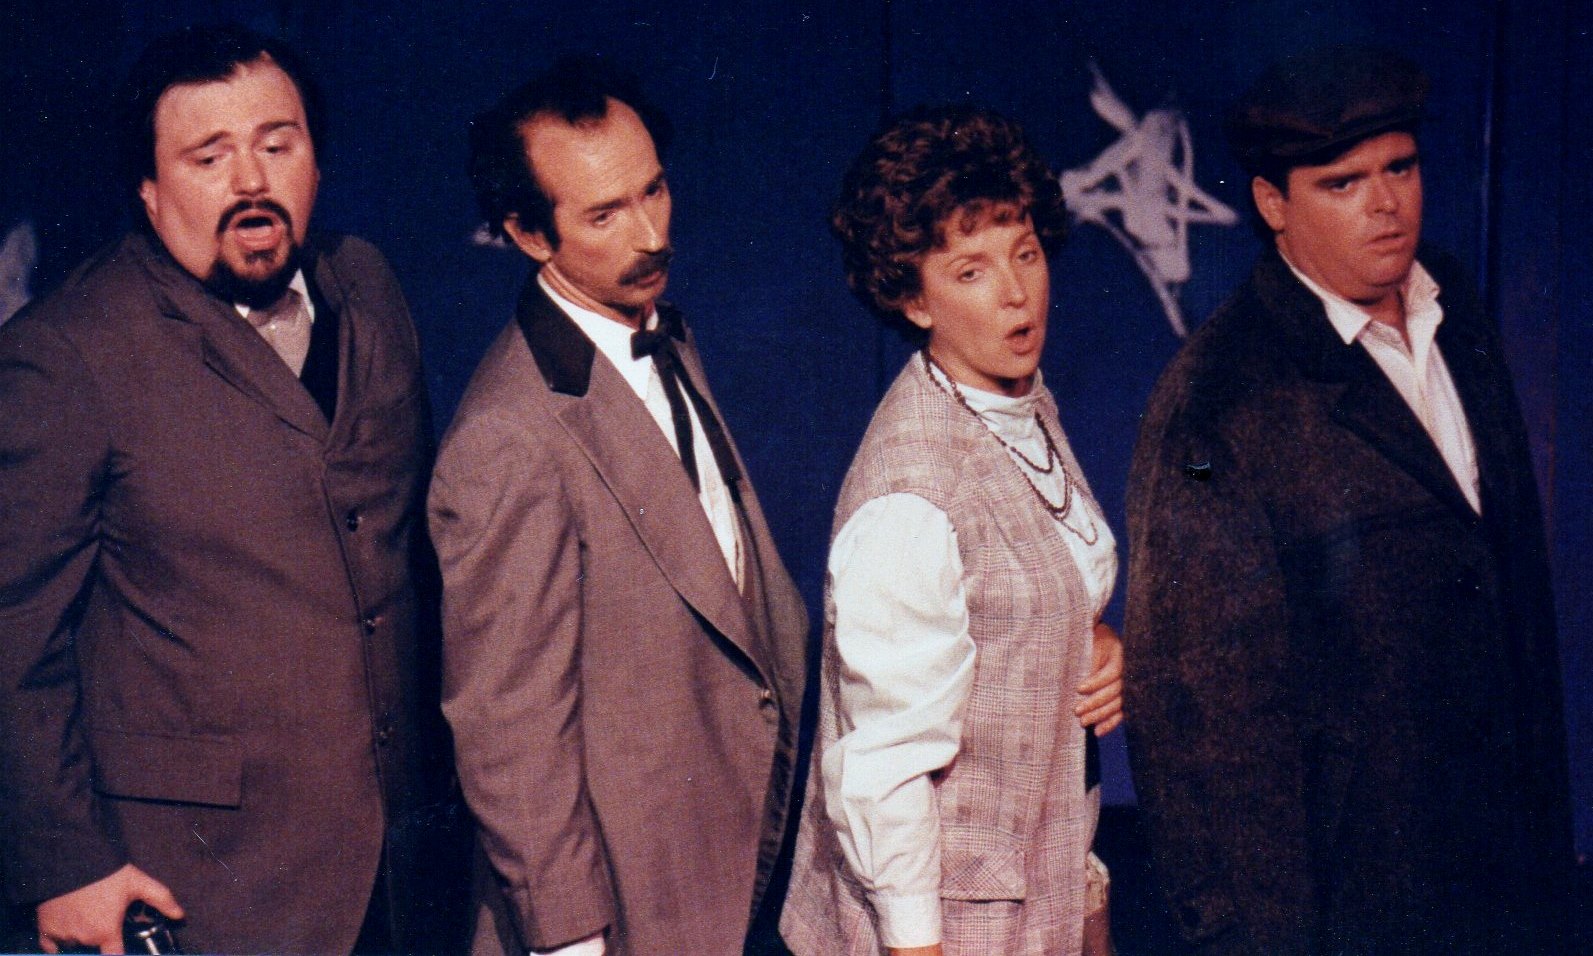 David Wo's legendary production of Stephen Sondheim's "Assassins" starred, from left, Wes Martin, Jon Gentry, Cathy Dresbach and Pat Russel.